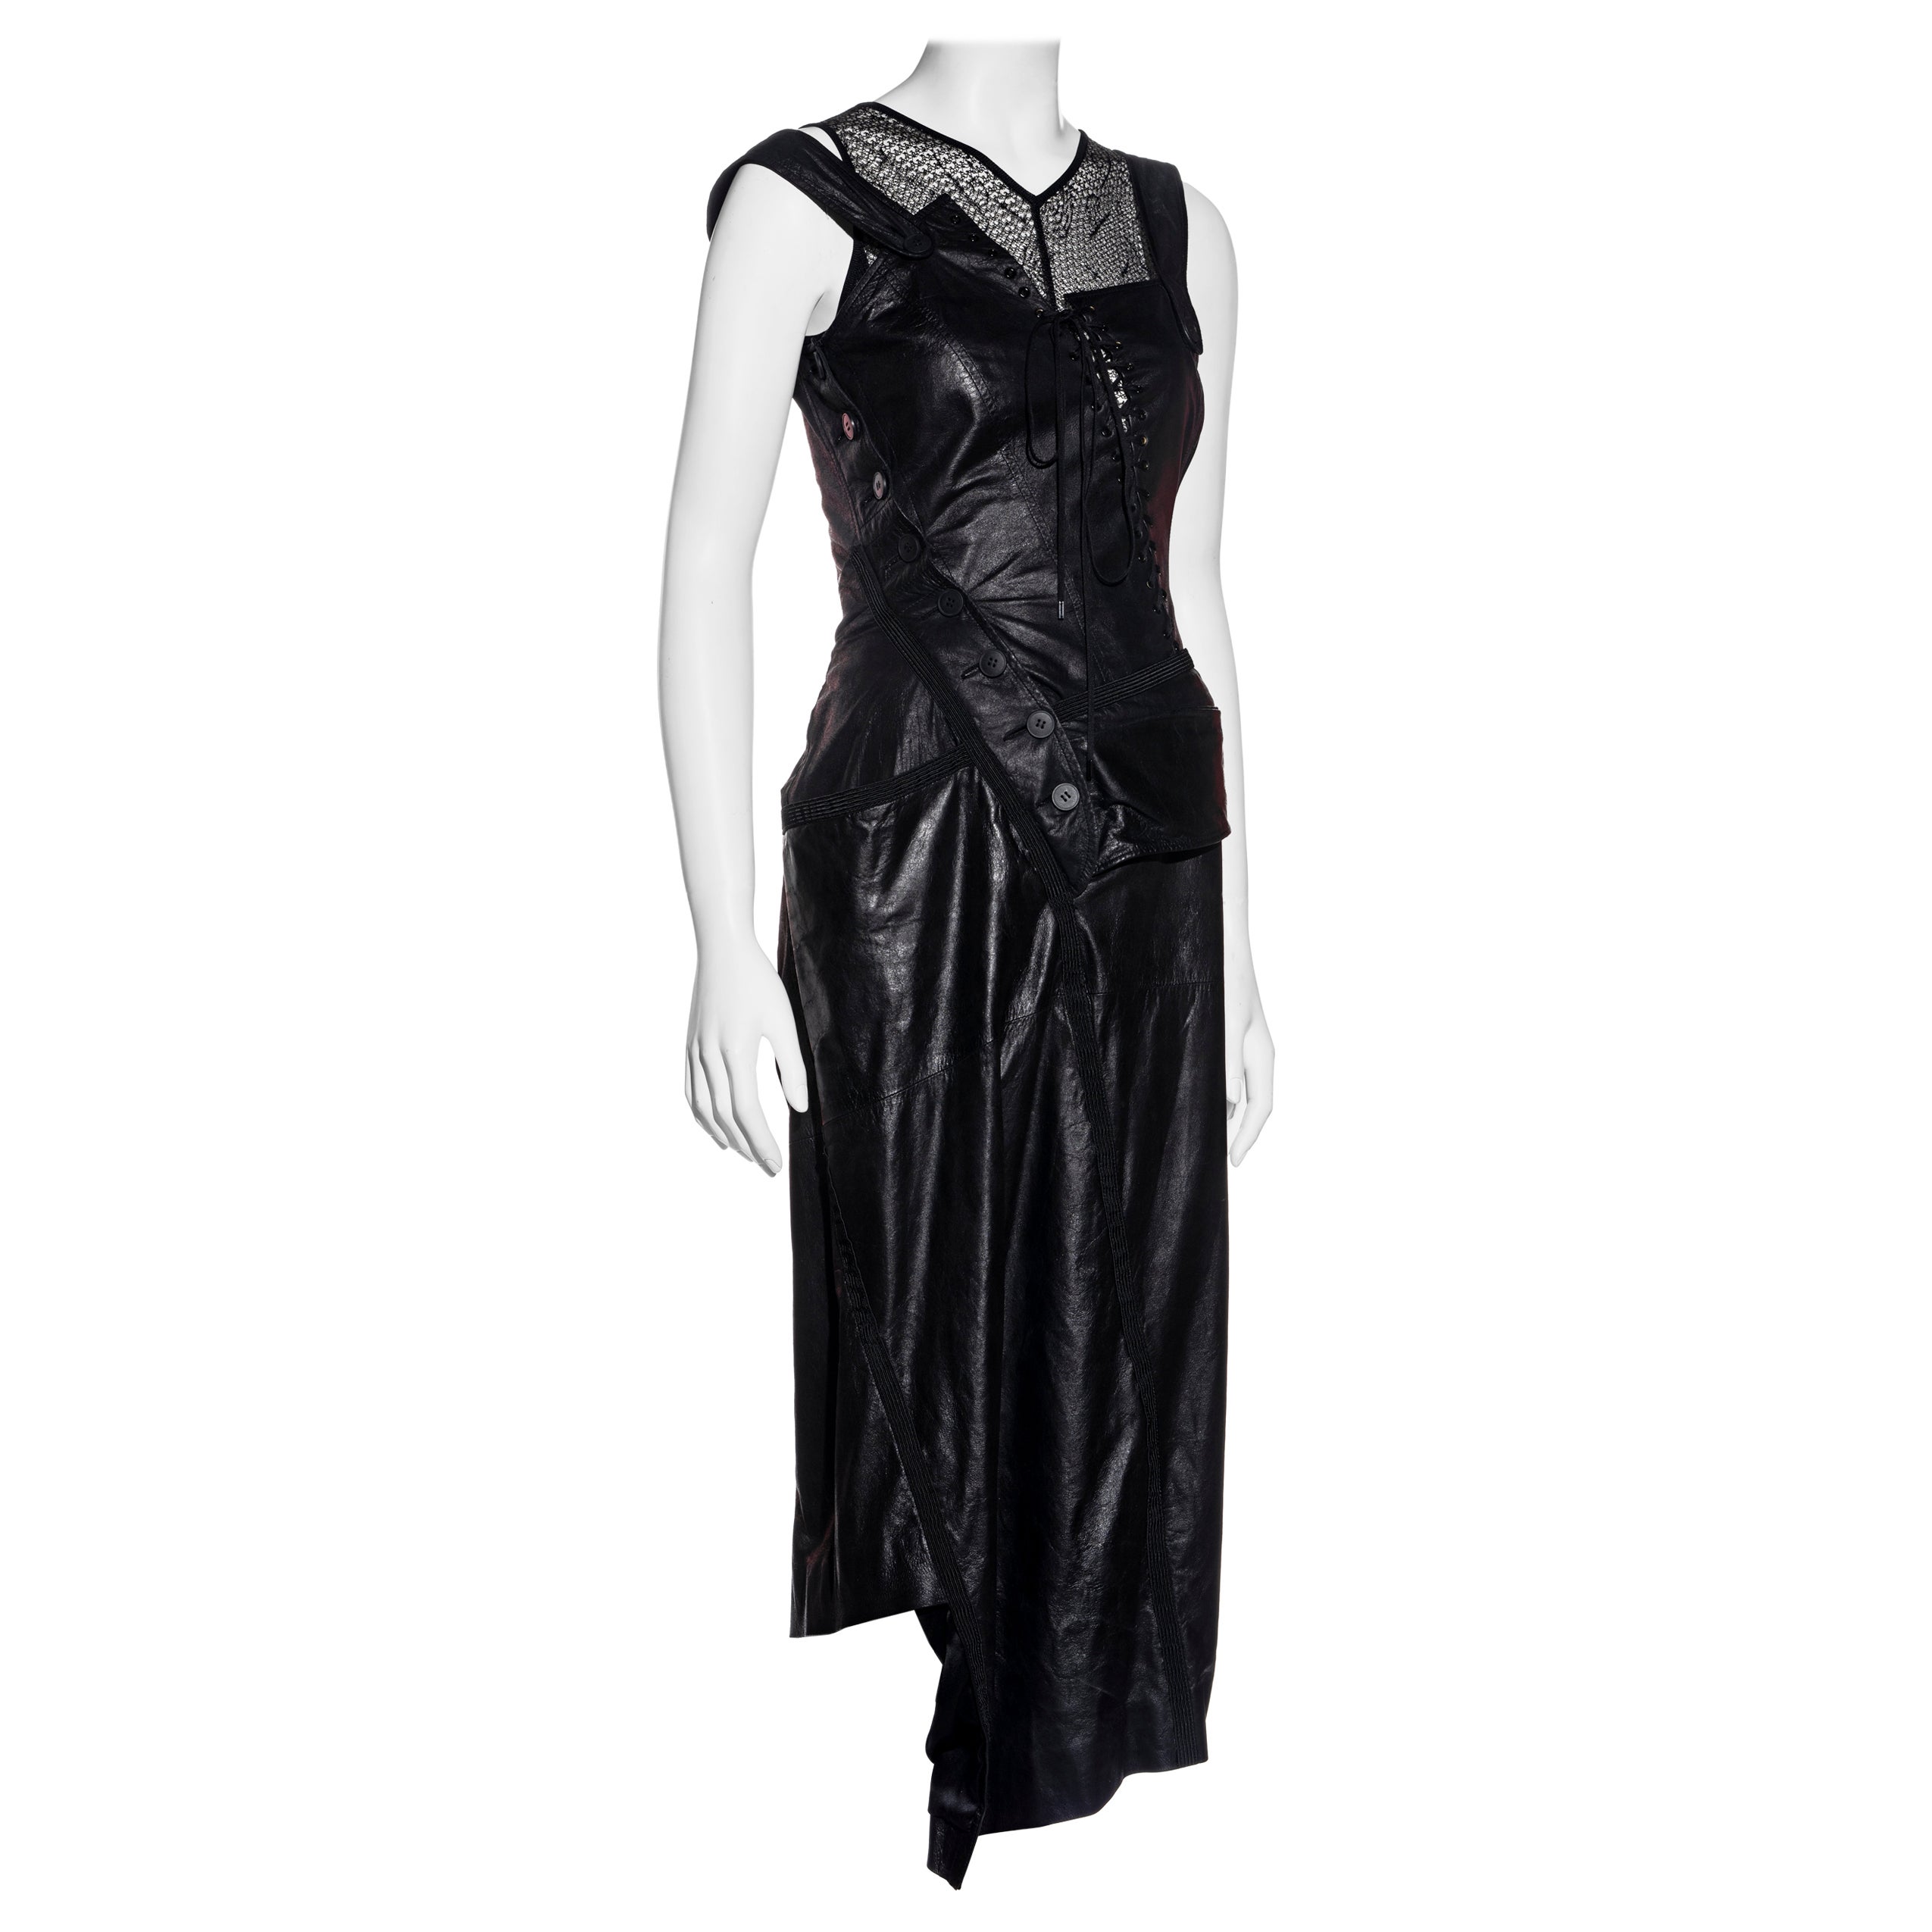 Christian Dior by John Galliano black bias-cut leather dress and vest, ss 2000